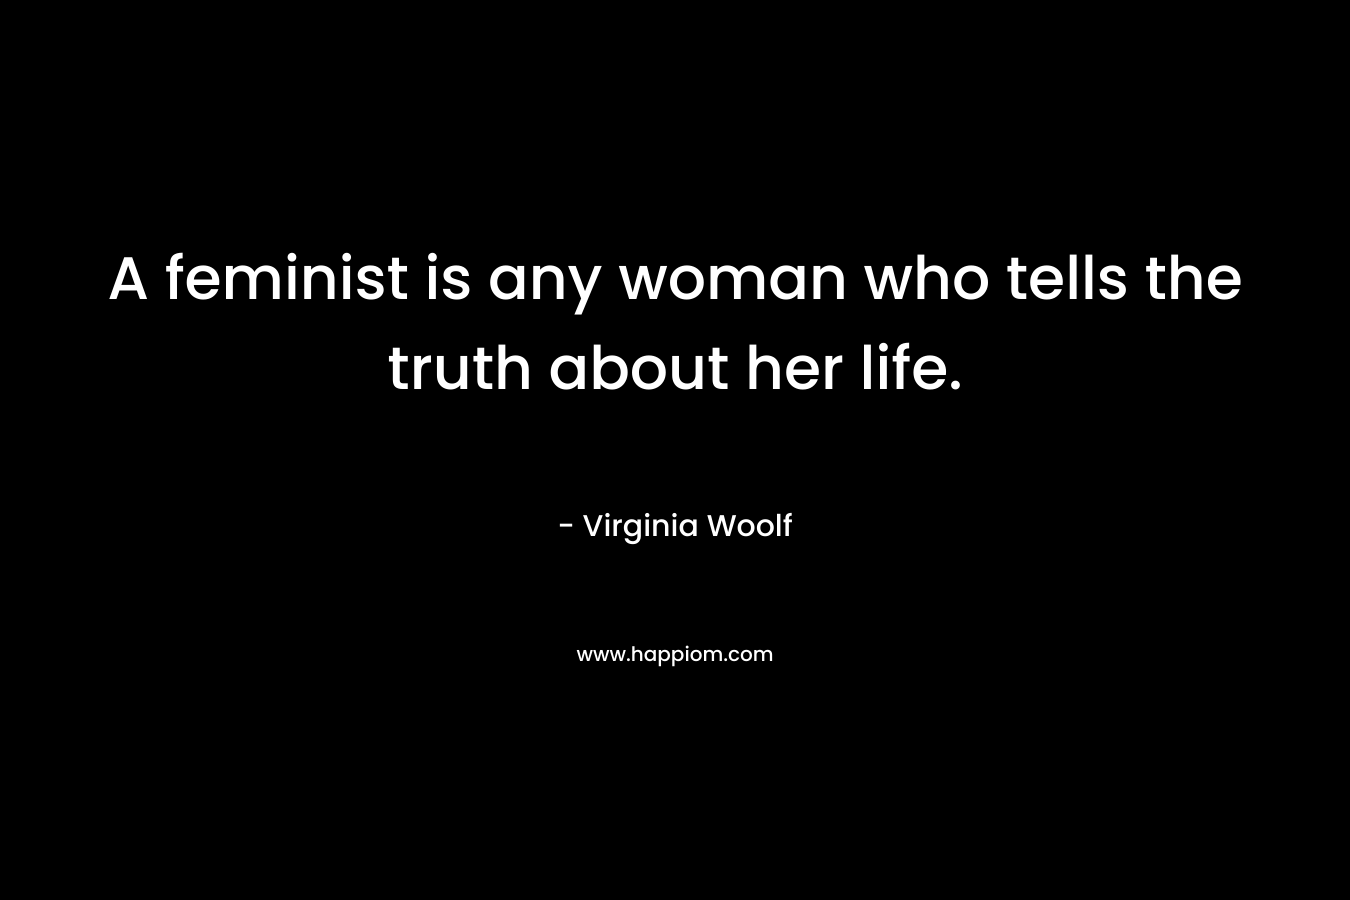 A feminist is any woman who tells the truth about her life.